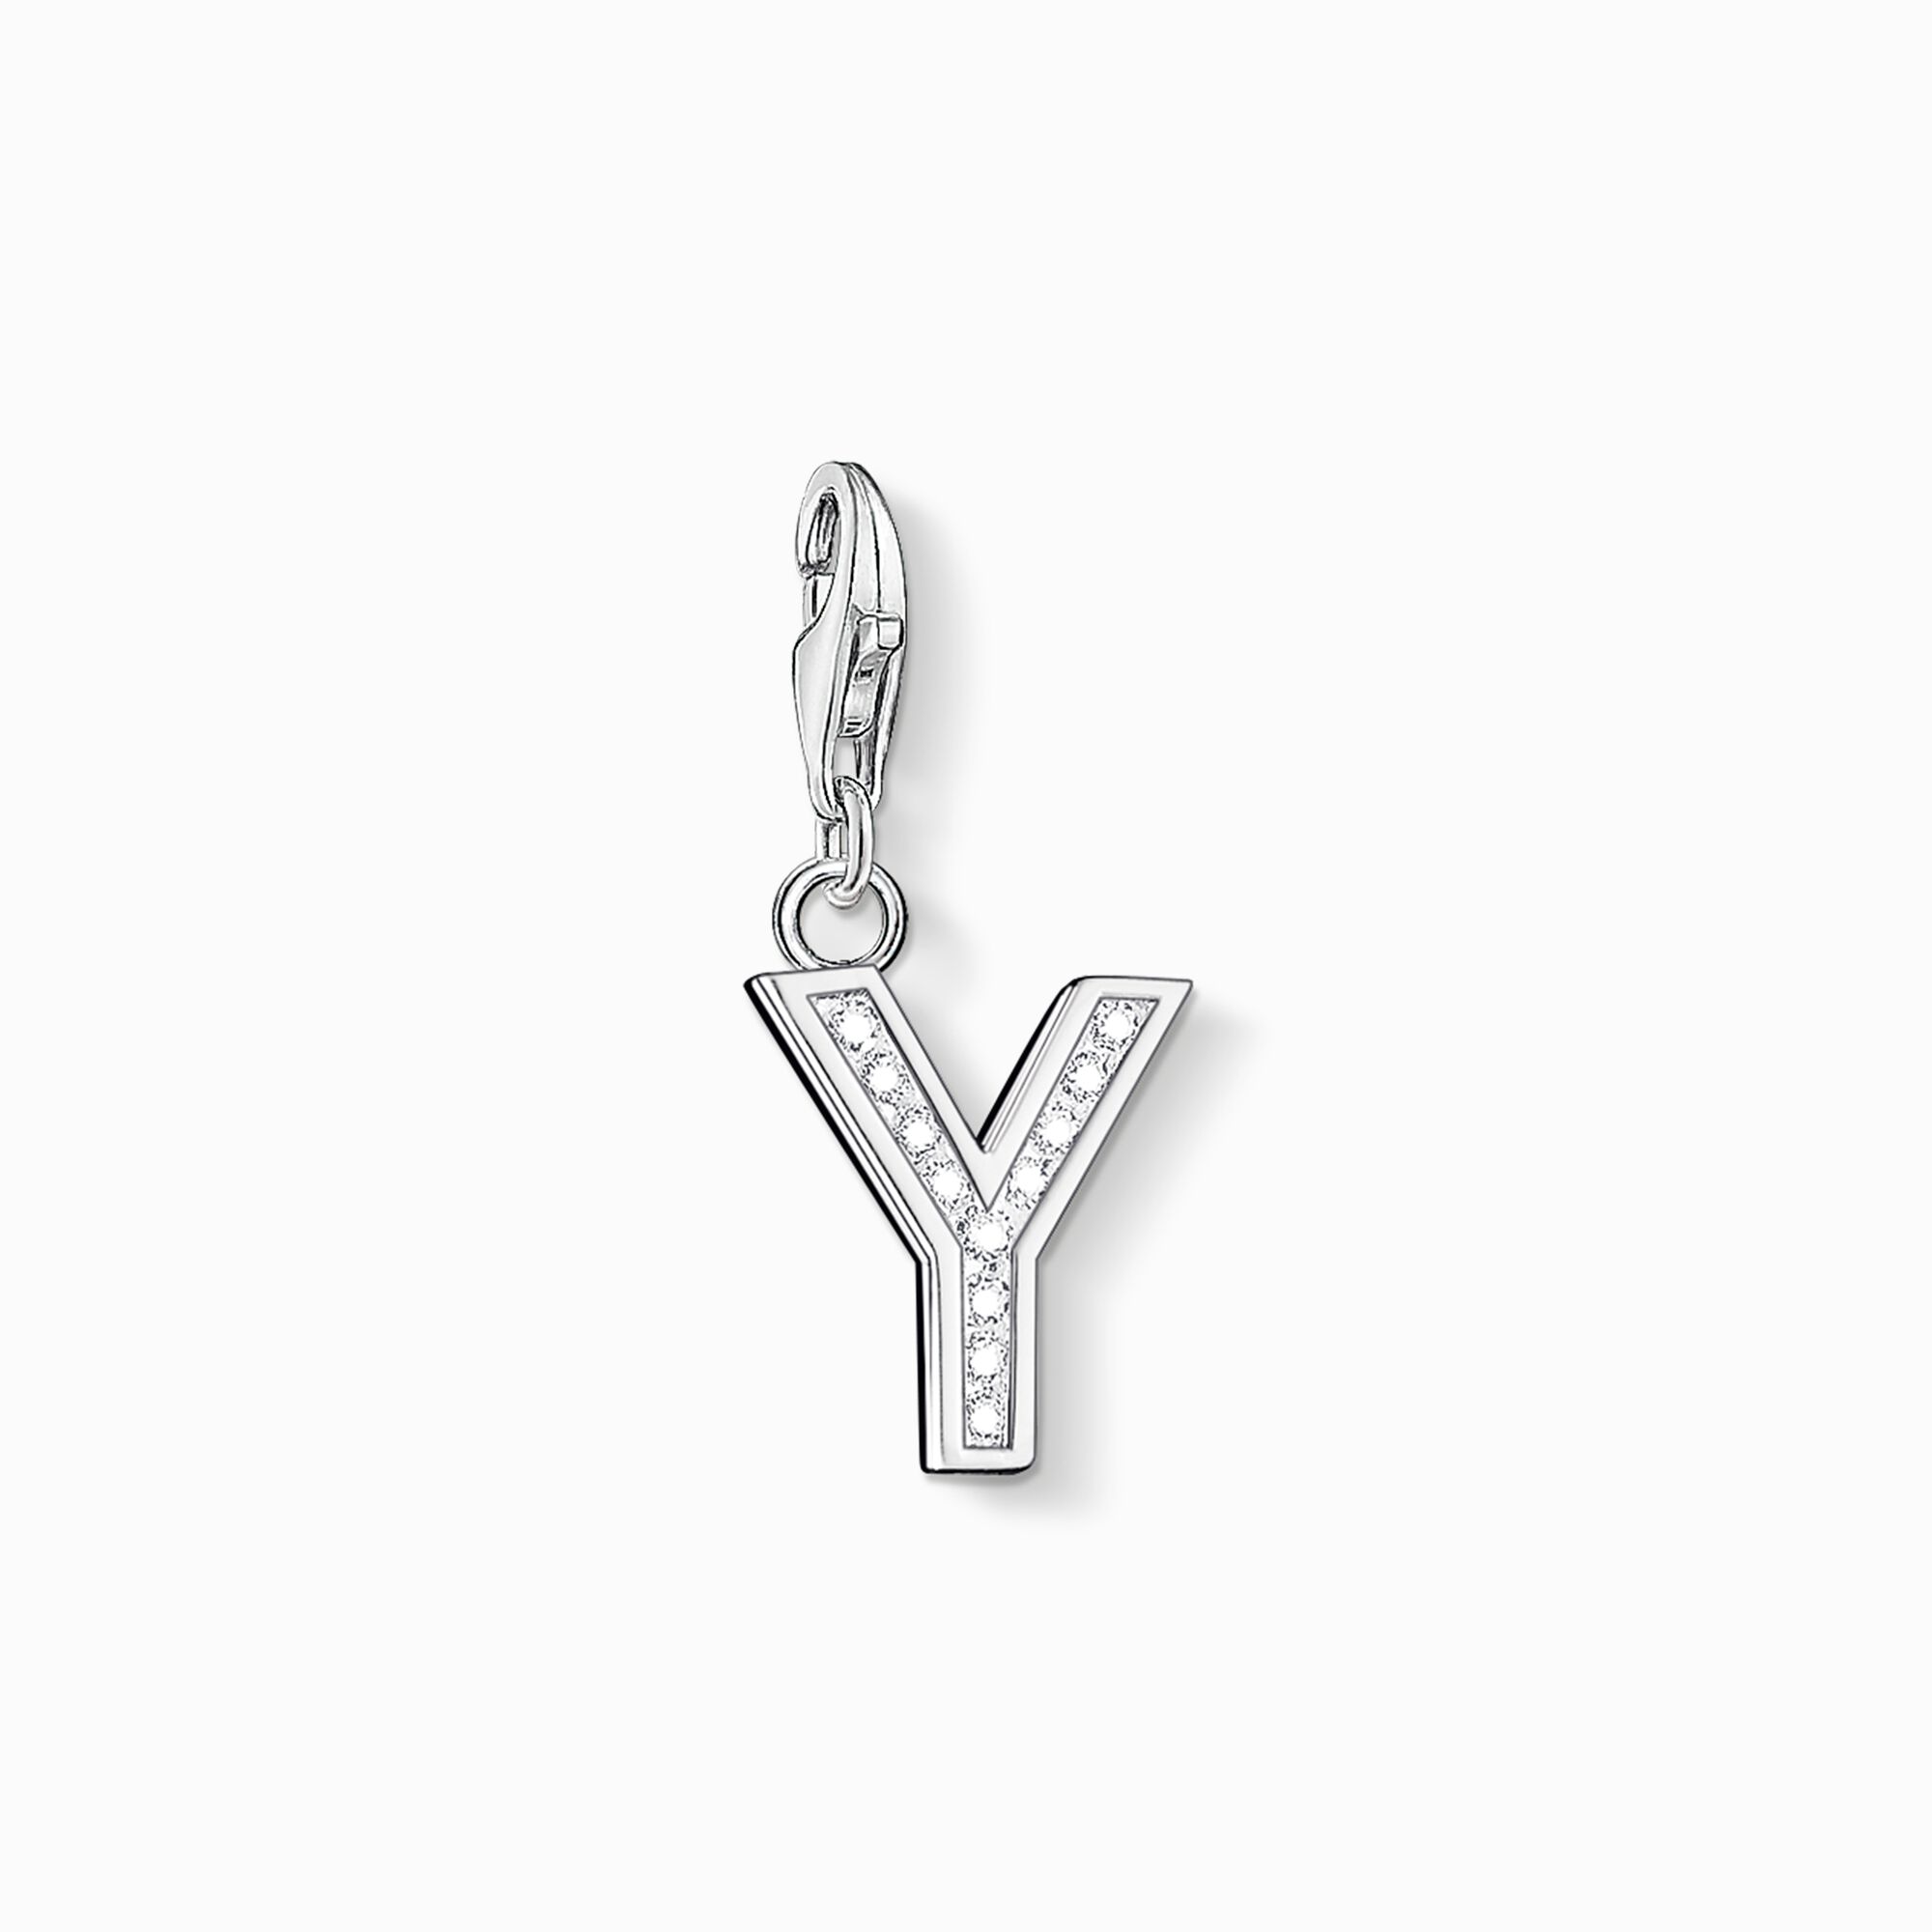 Charm pendant letter Y from the Charm Club collection in the THOMAS SABO online store